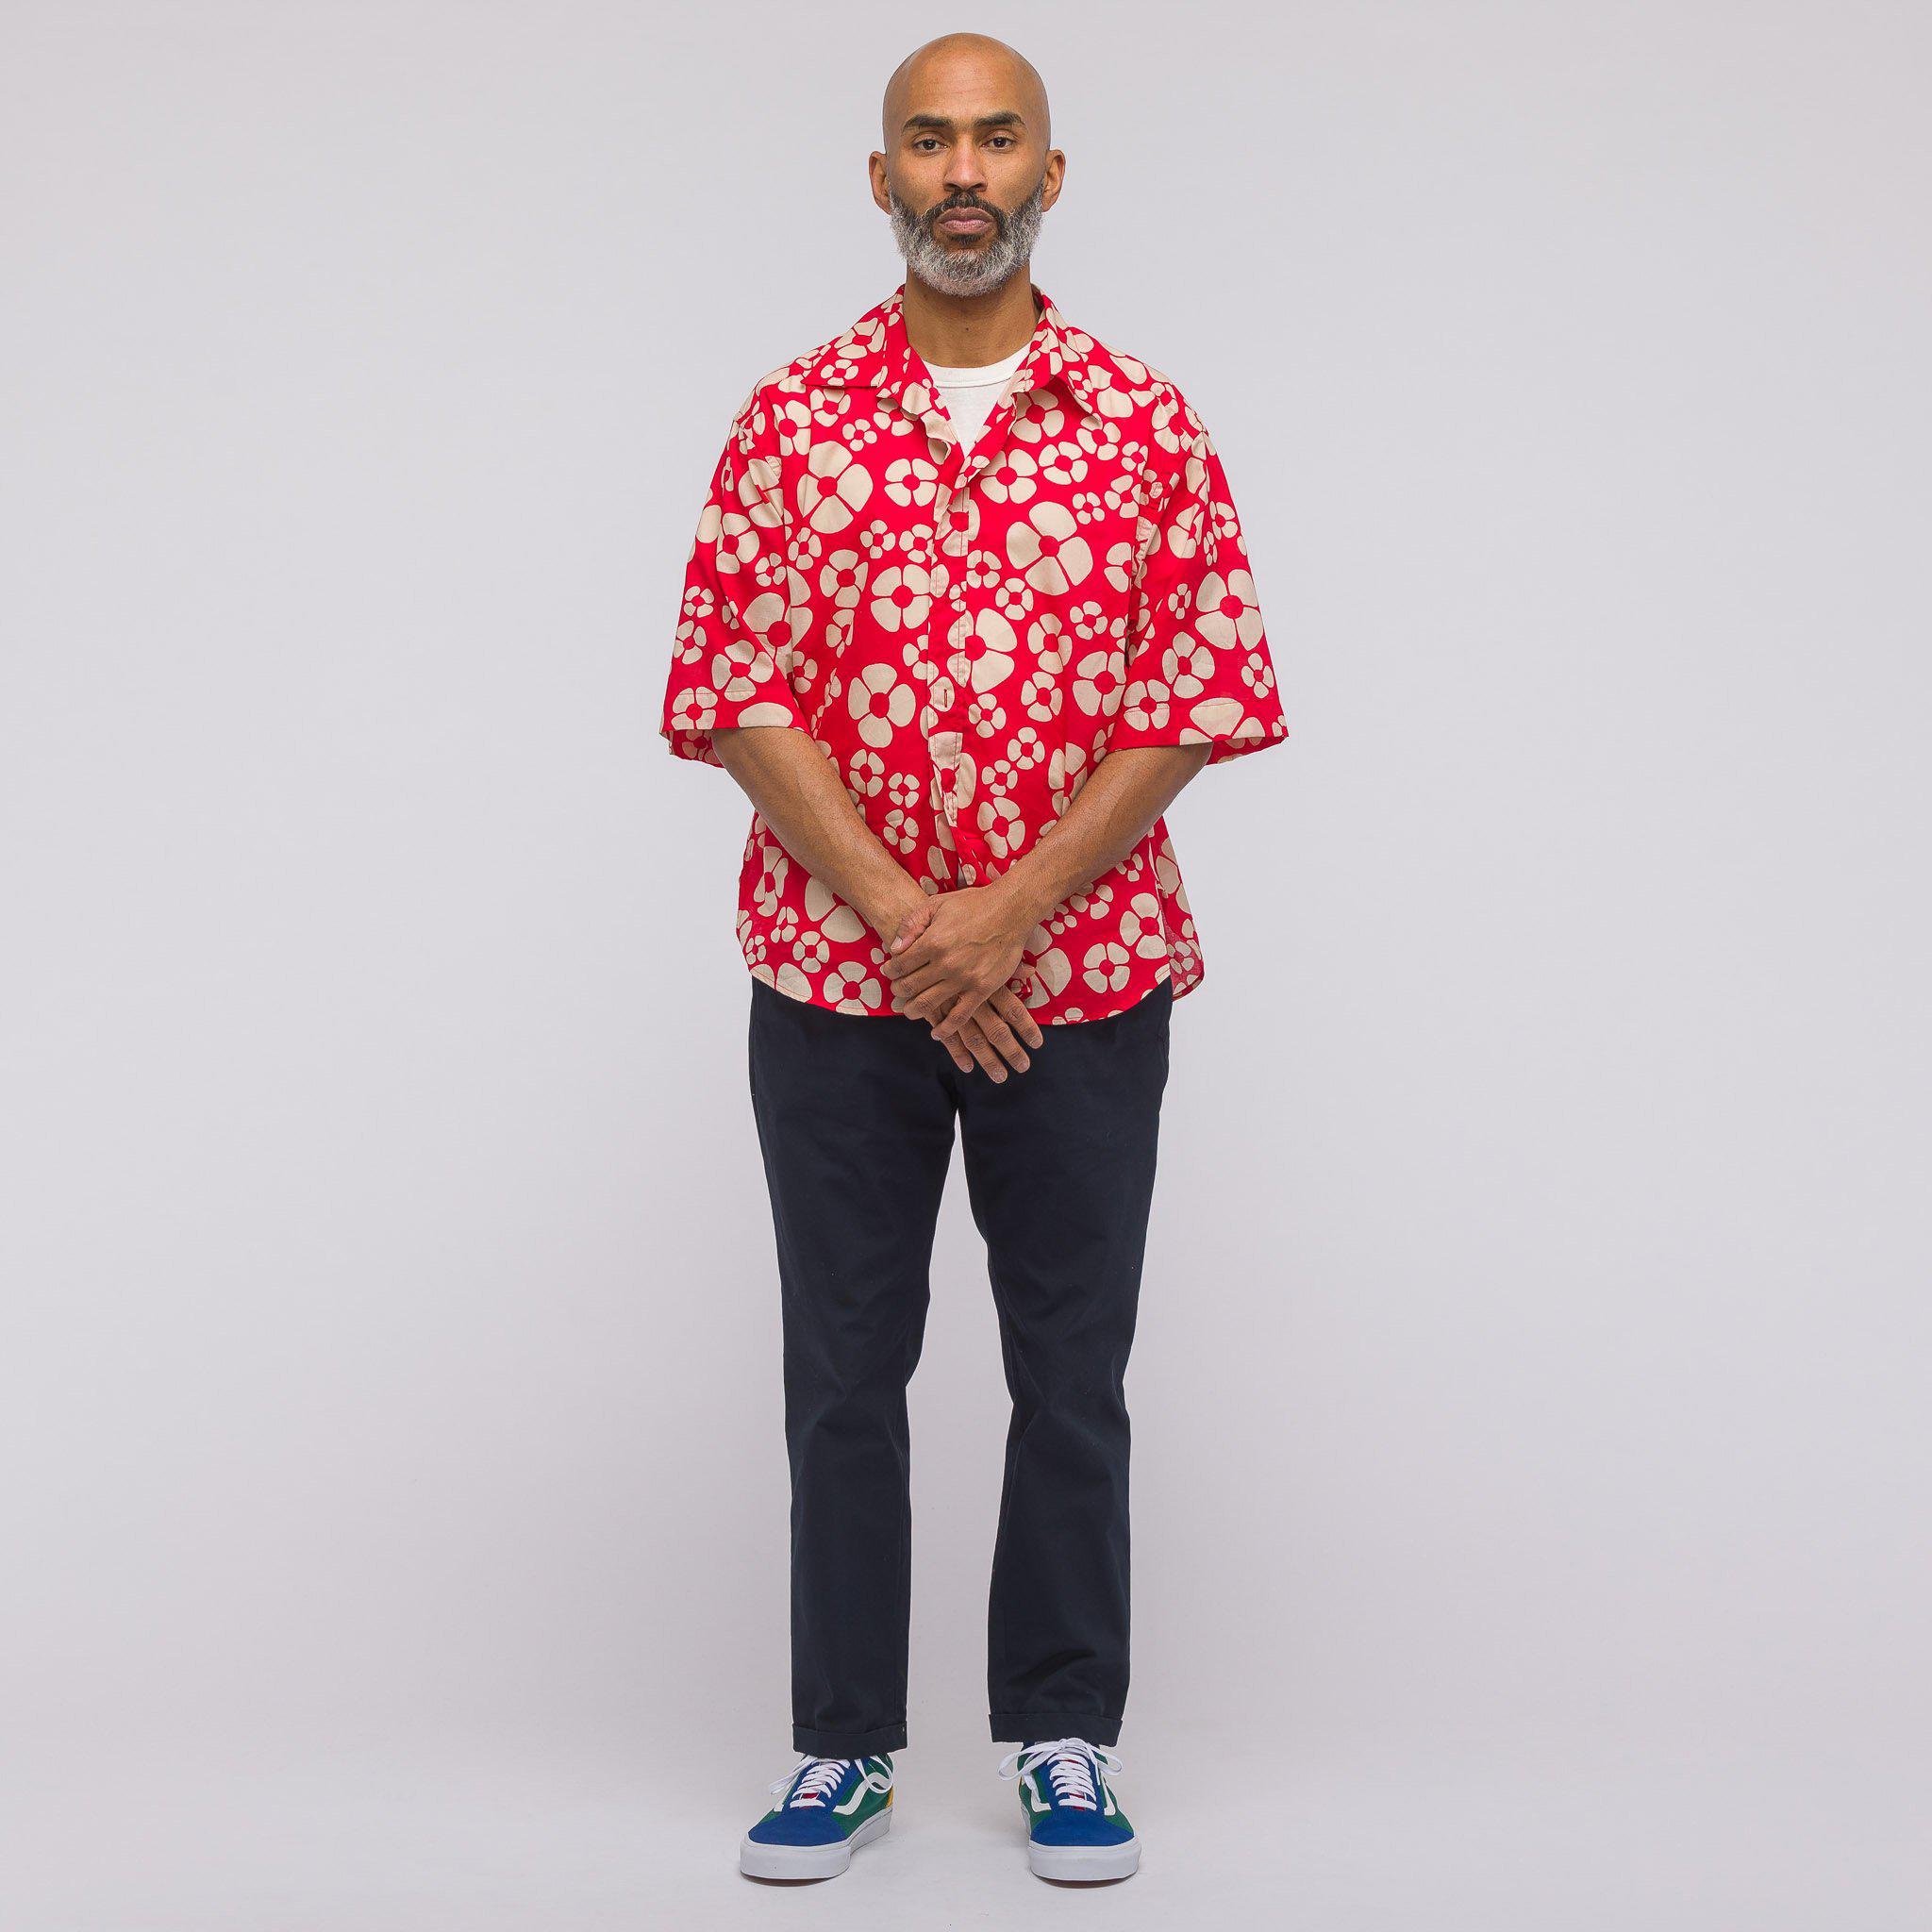 Marni Cotton Short Sleeve Sport Shirt In Red Print for Men - Lyst